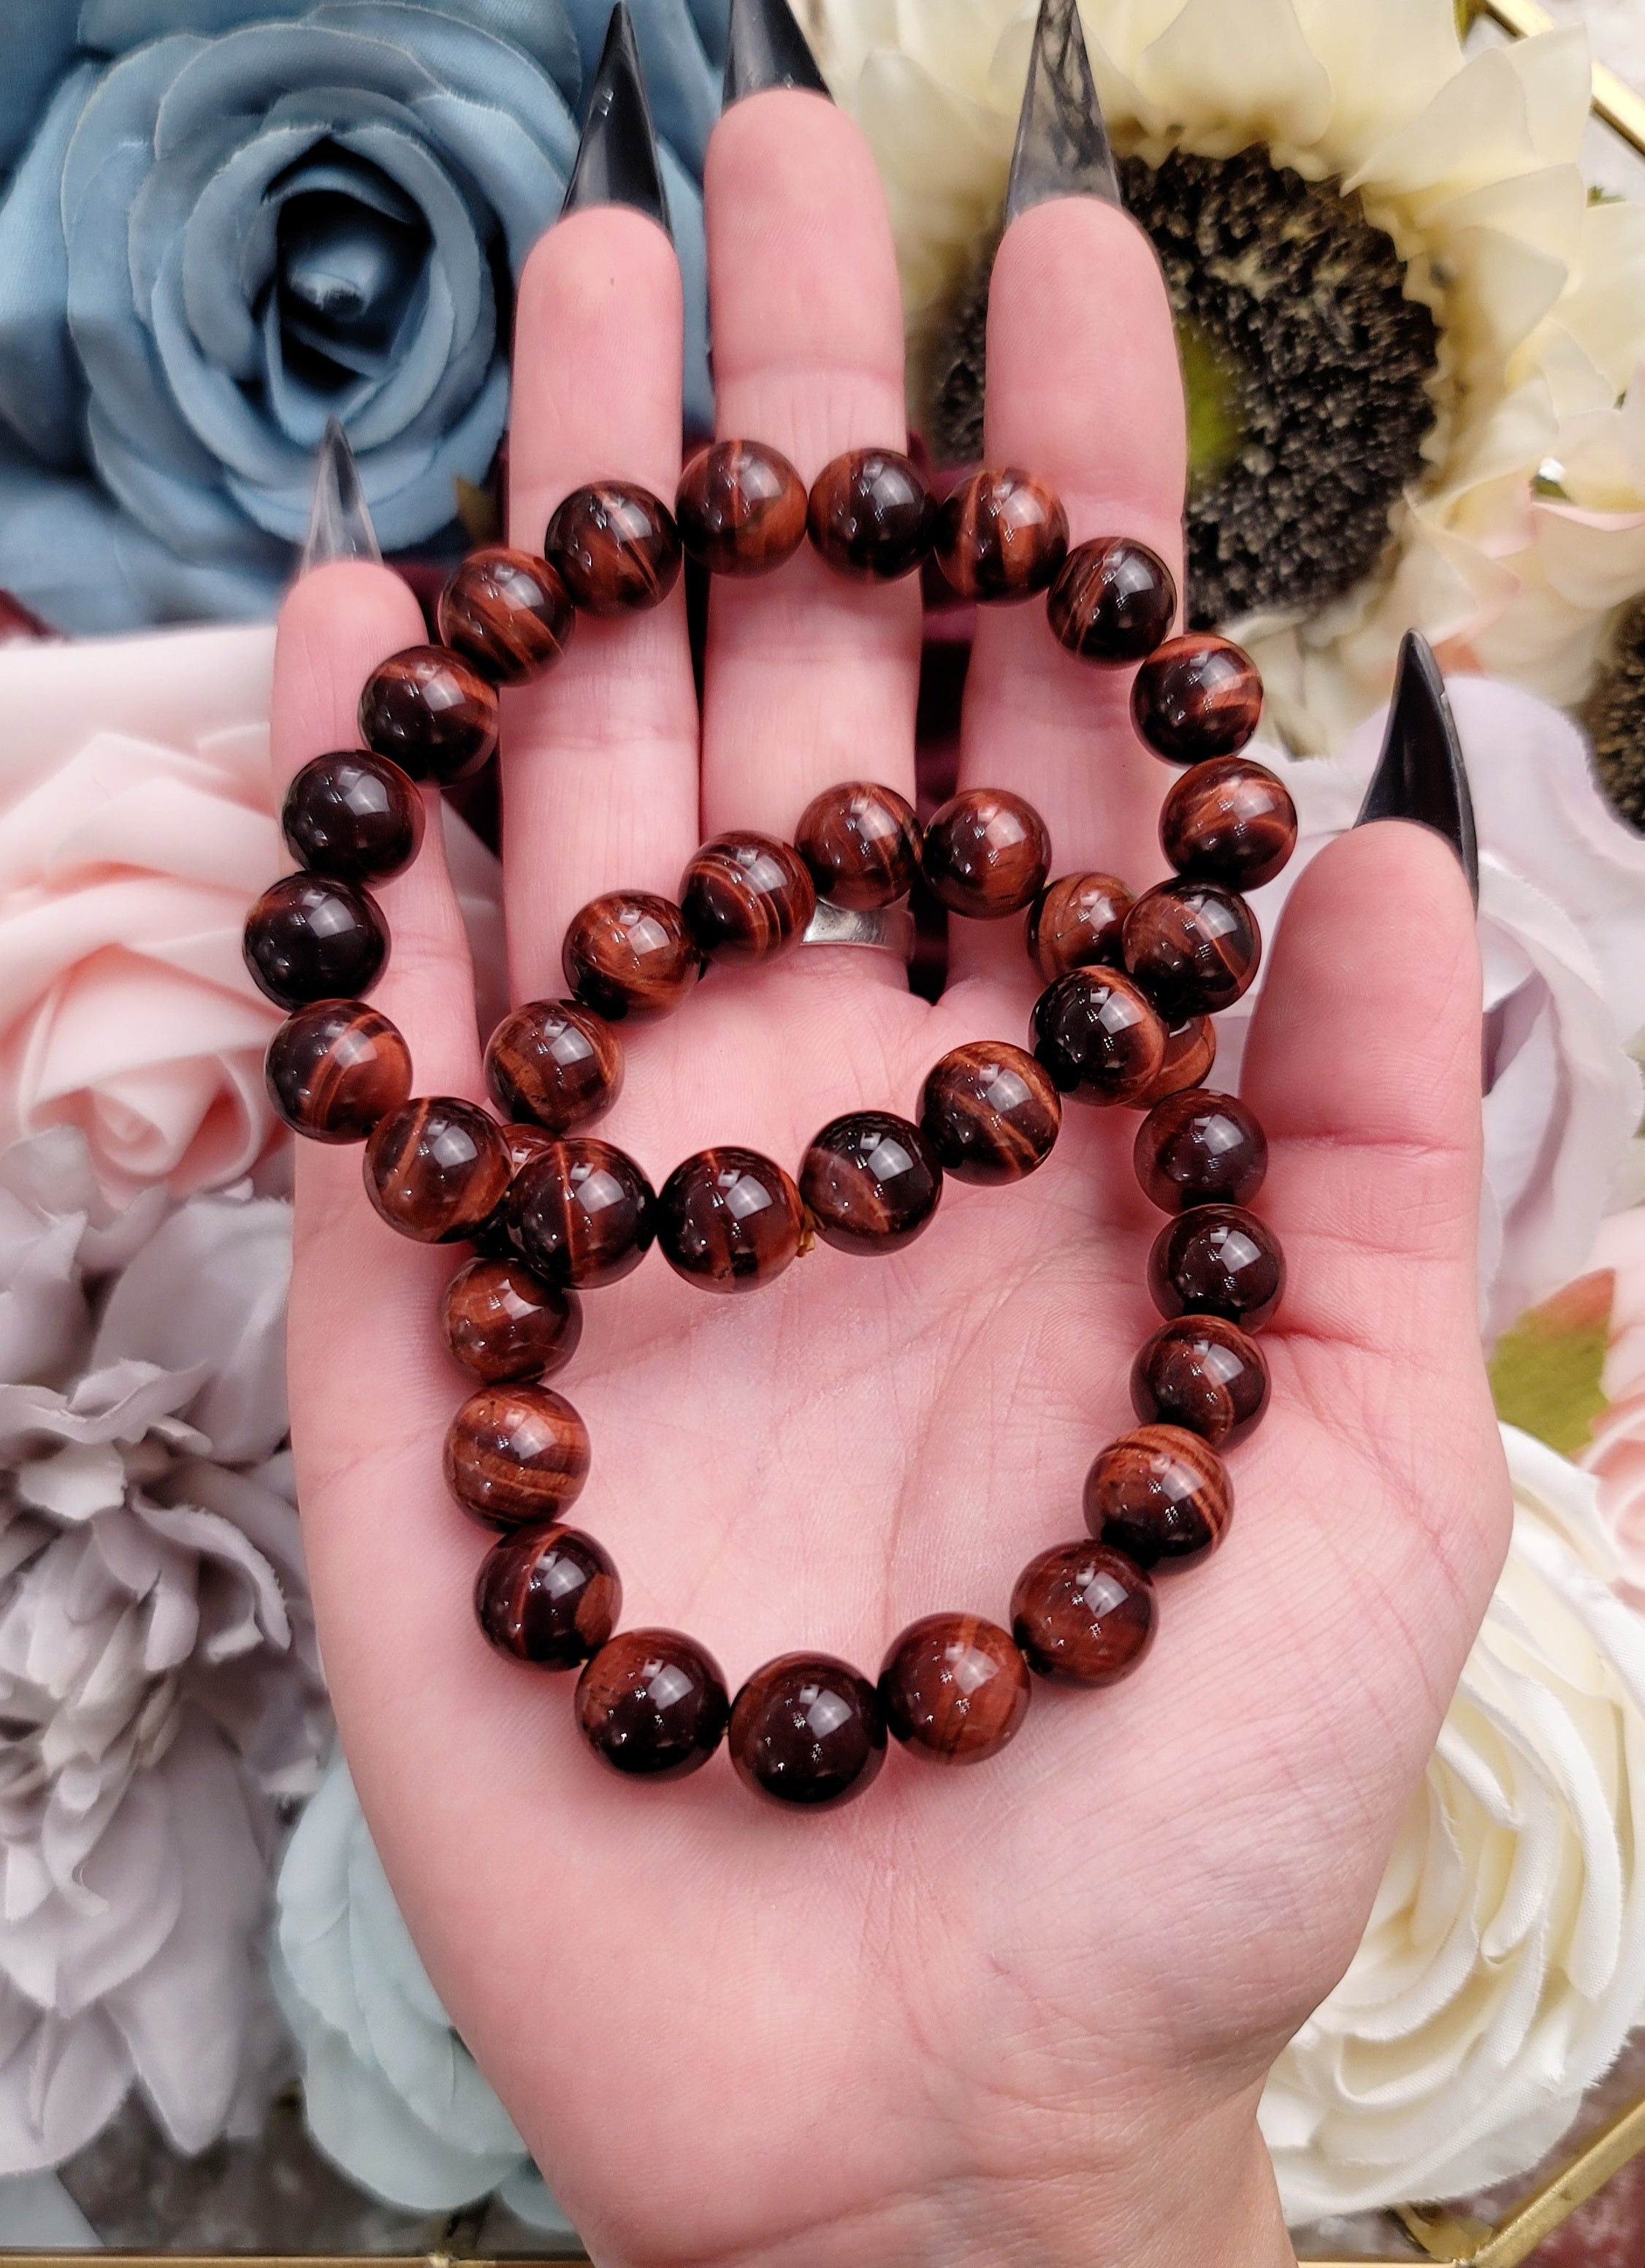 Red Tiger Eye Bracelet (AAA Grade) for Balancing Emotions, Motivation and Strength